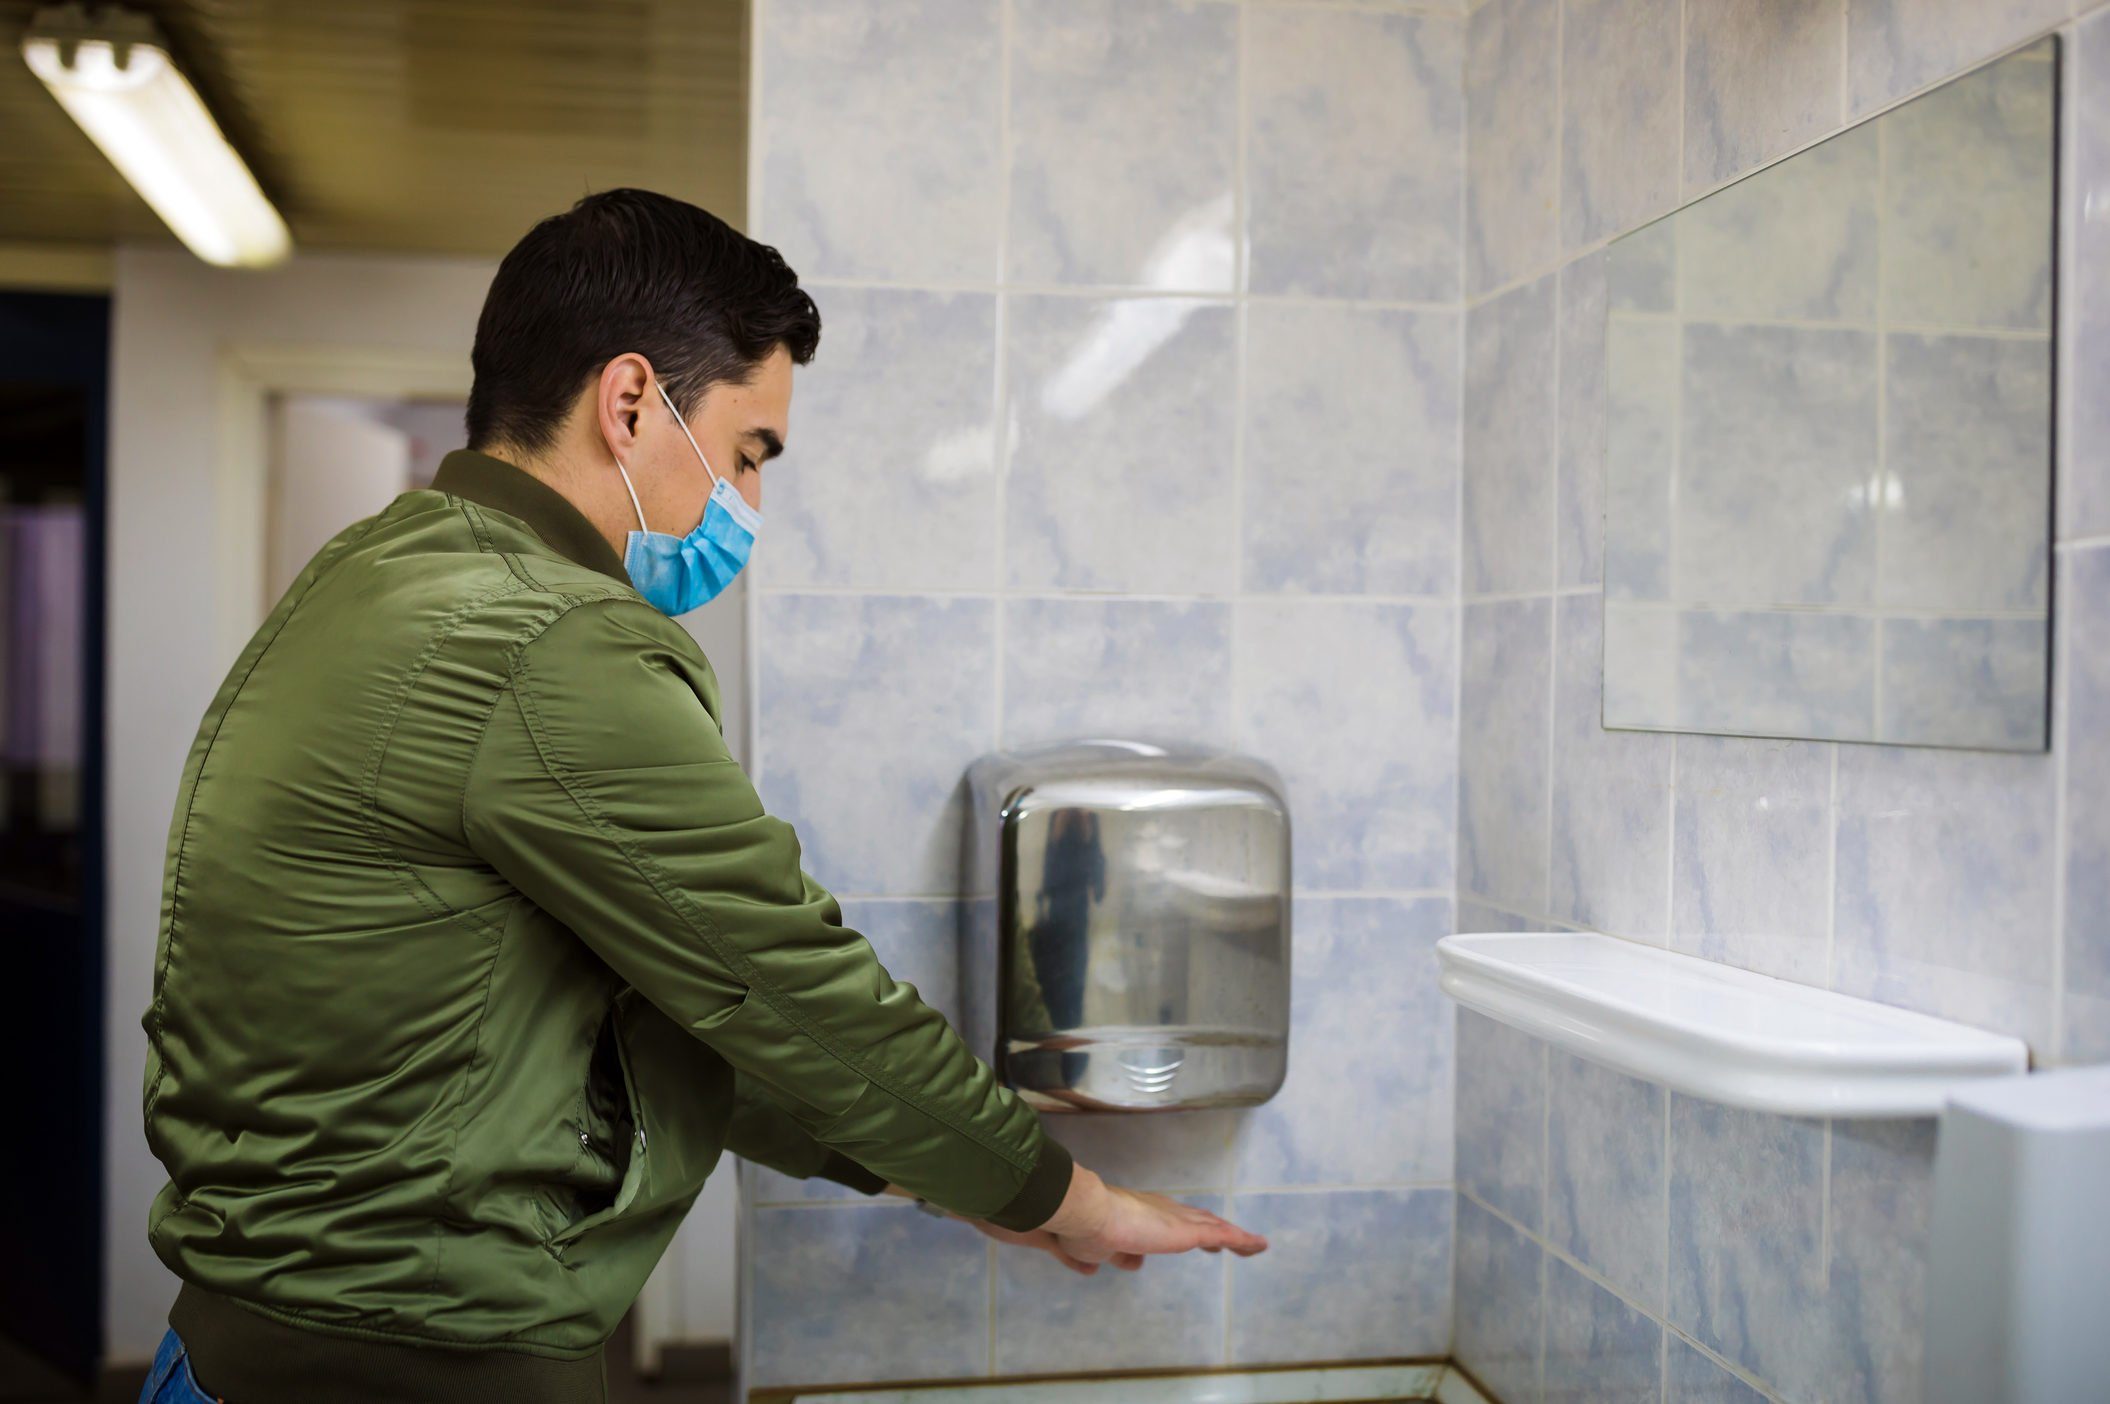 Man dries wet hands with an electric hand dryers